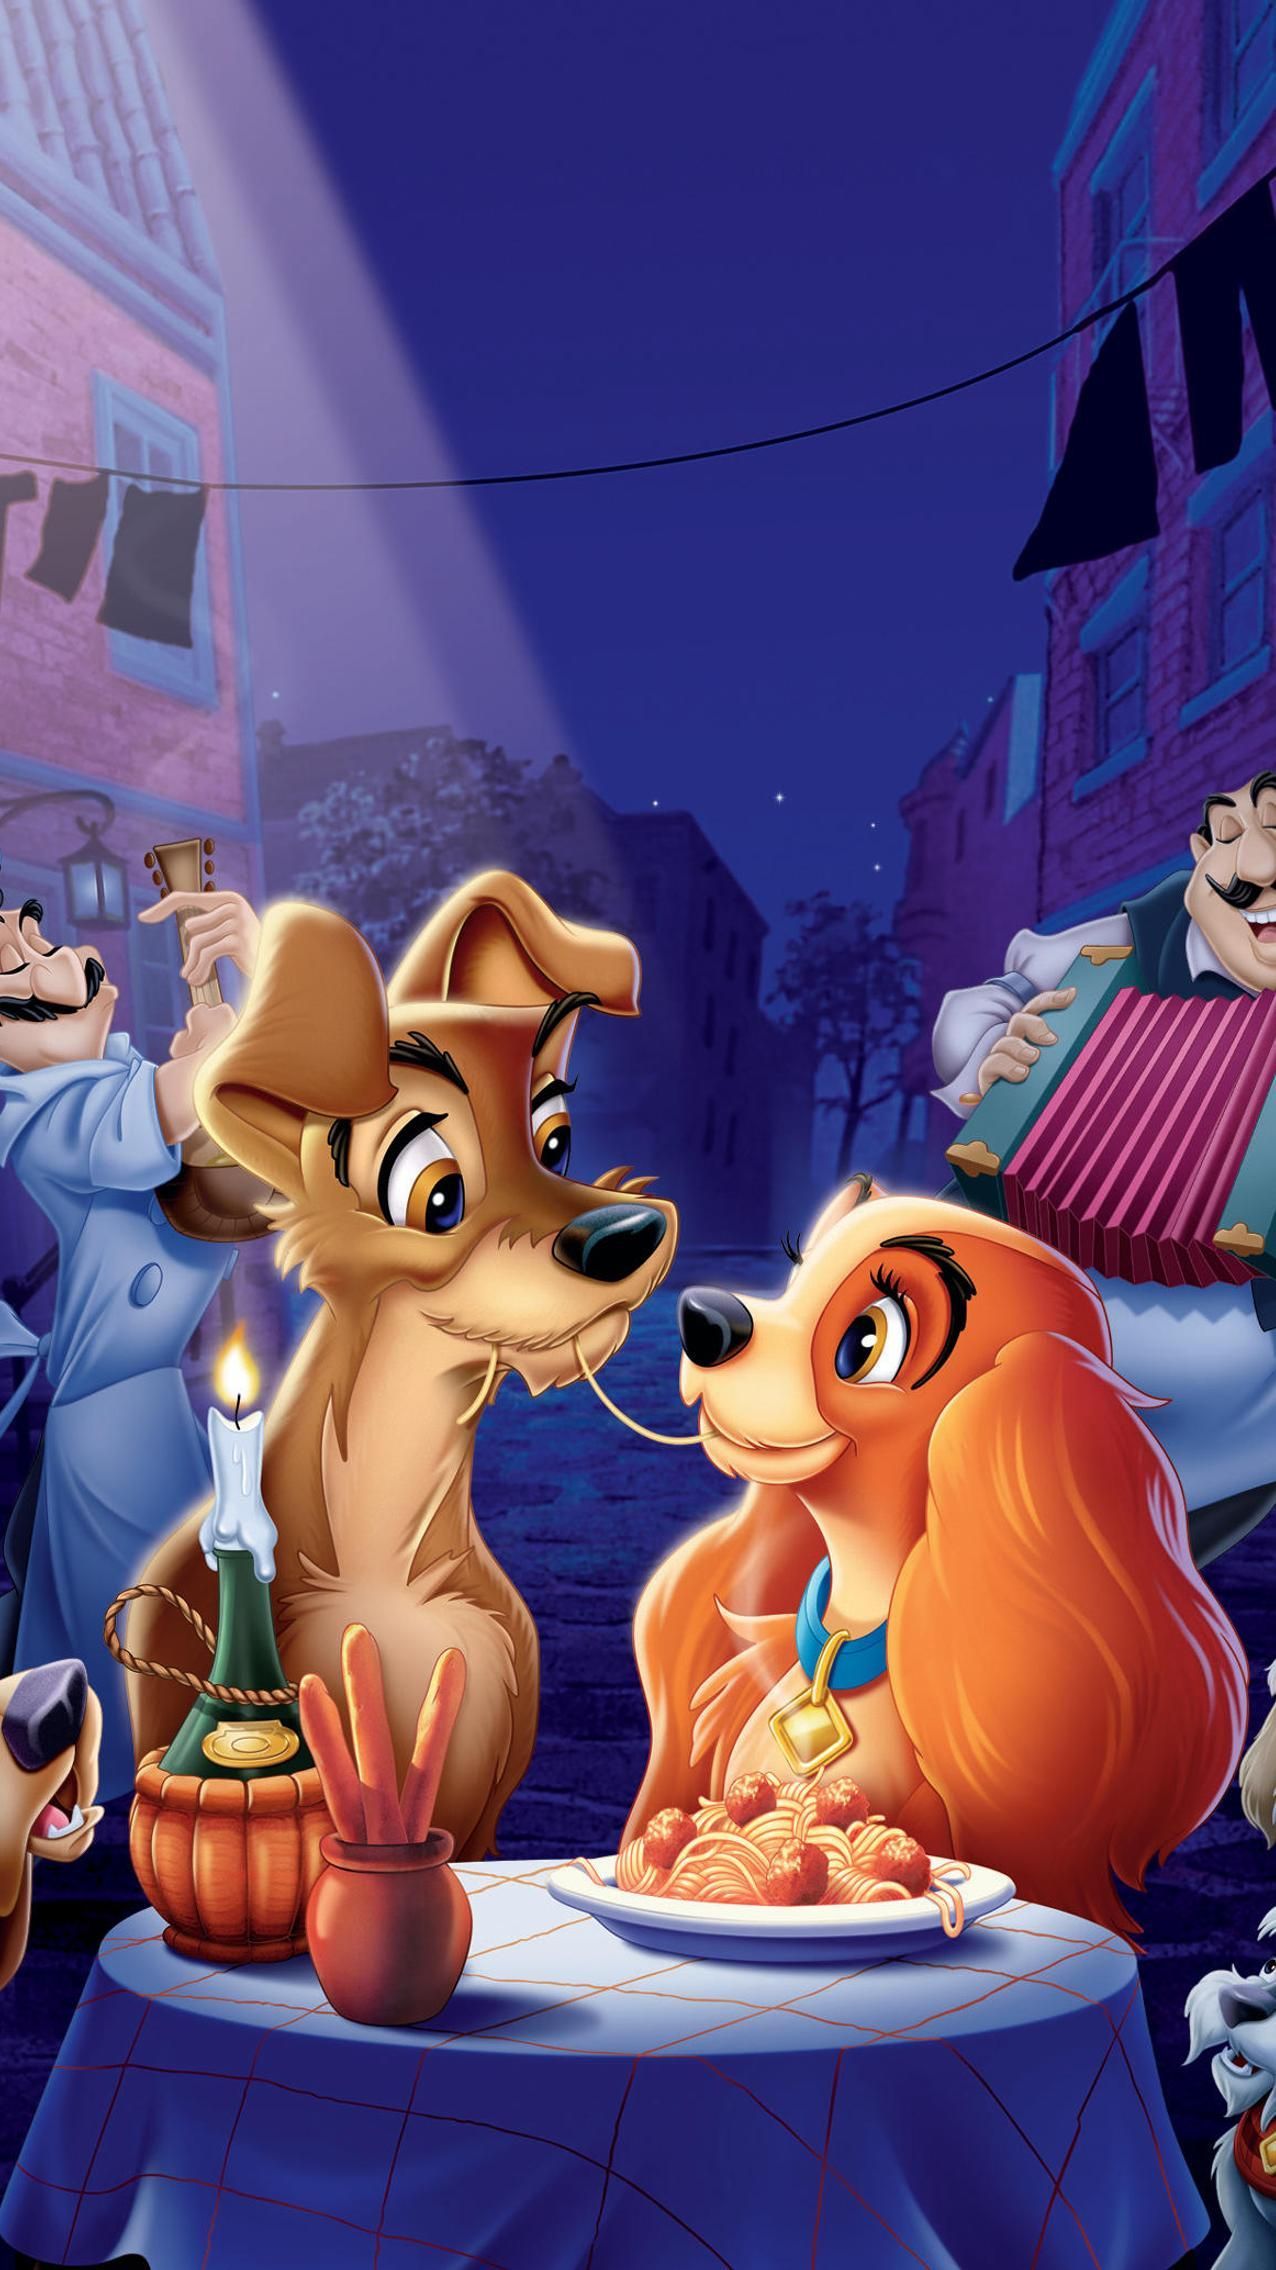 Lady and the Tramp (1955) Phone Wallpaper. Moviemania. Cute disney wallpaper, Lady and the tramp, Disney wallpaper